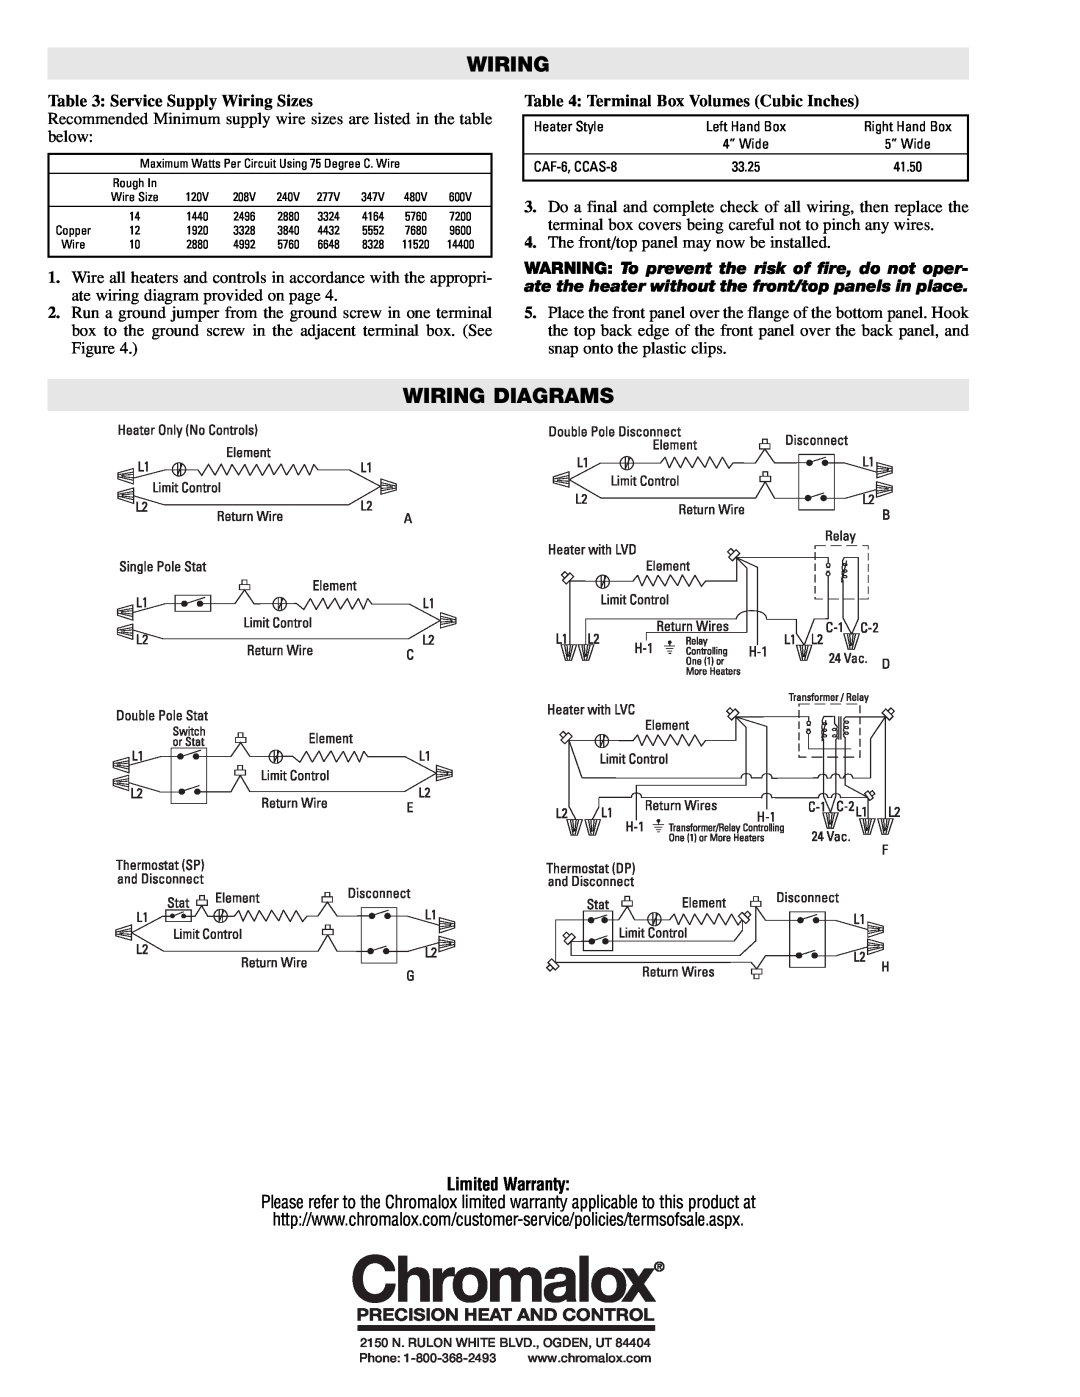 Chromalox CAF-6, CCAS-8 Wiring Diagrams, Service Supply Wiring Sizes, Terminal Box Volumes Cubic Inches, Limited Warranty 